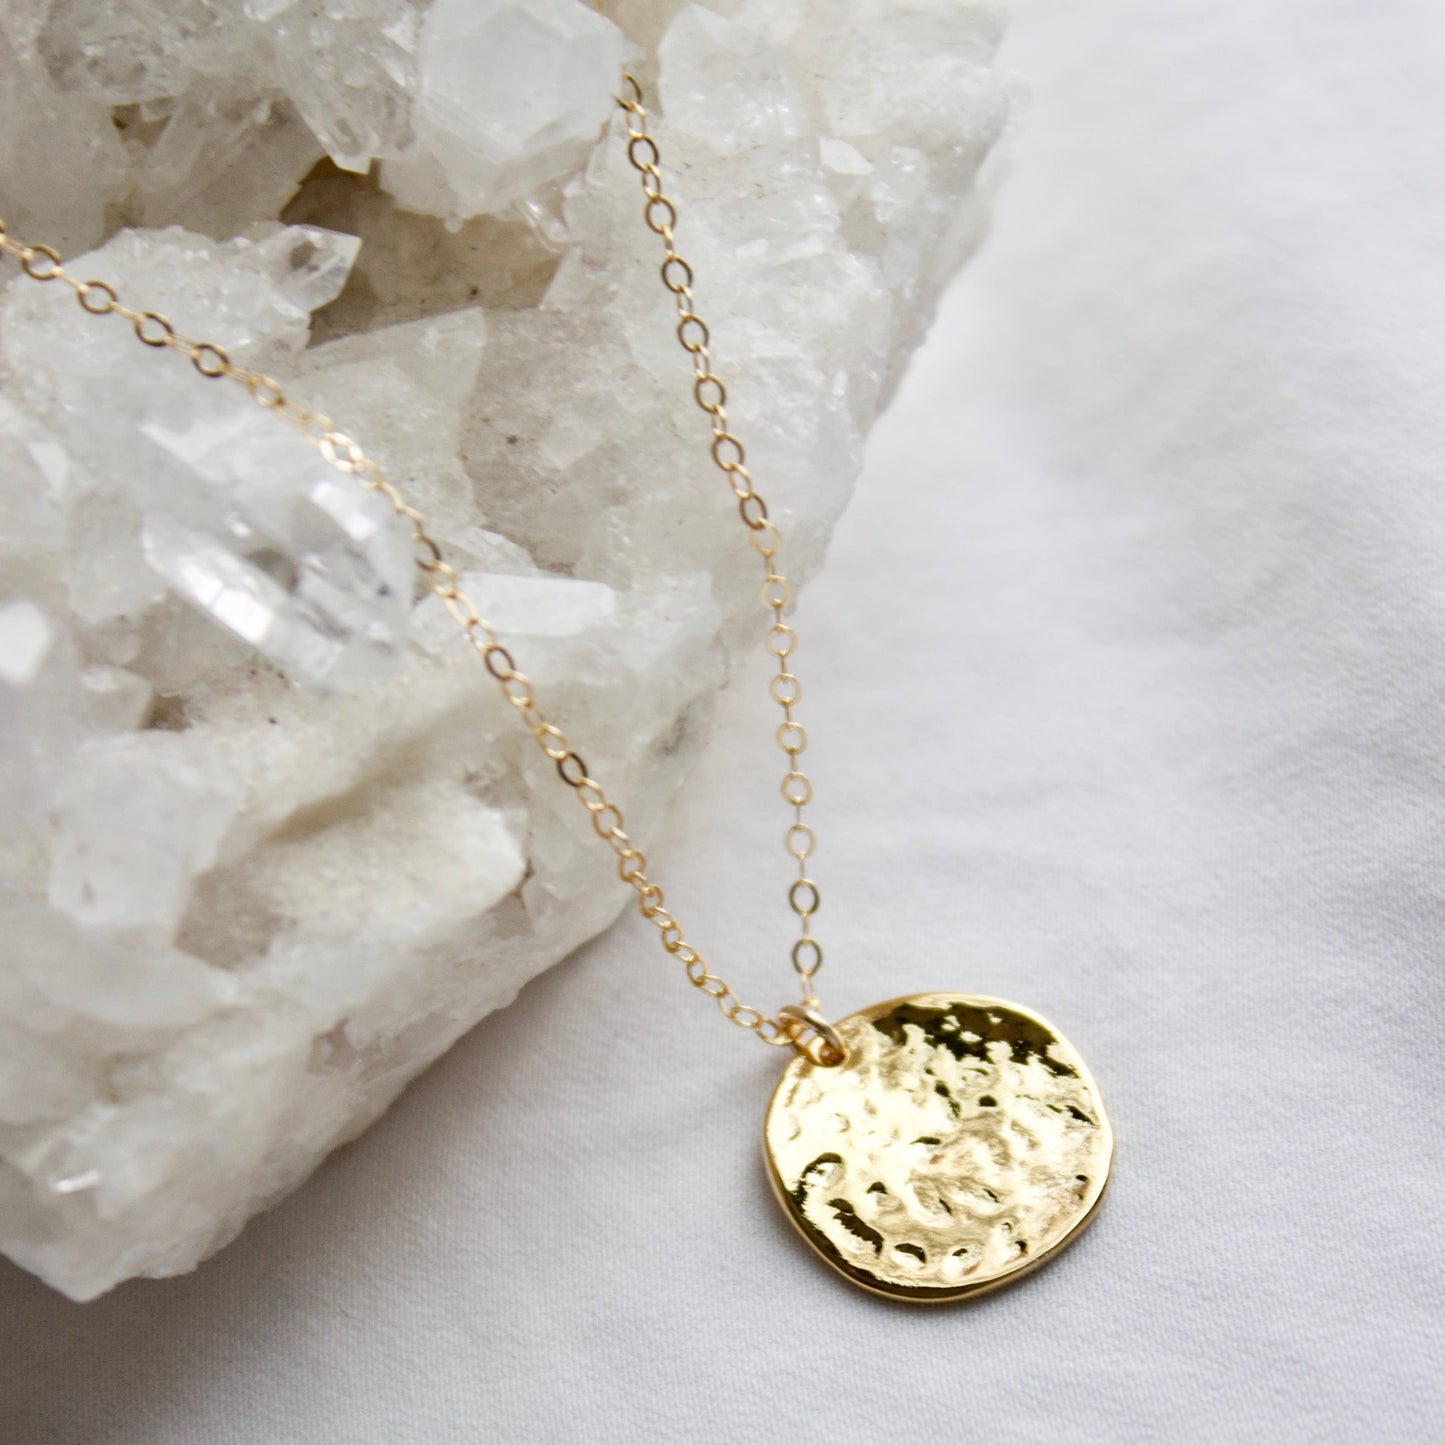 POUNDED DISK NECKLACE: Gold